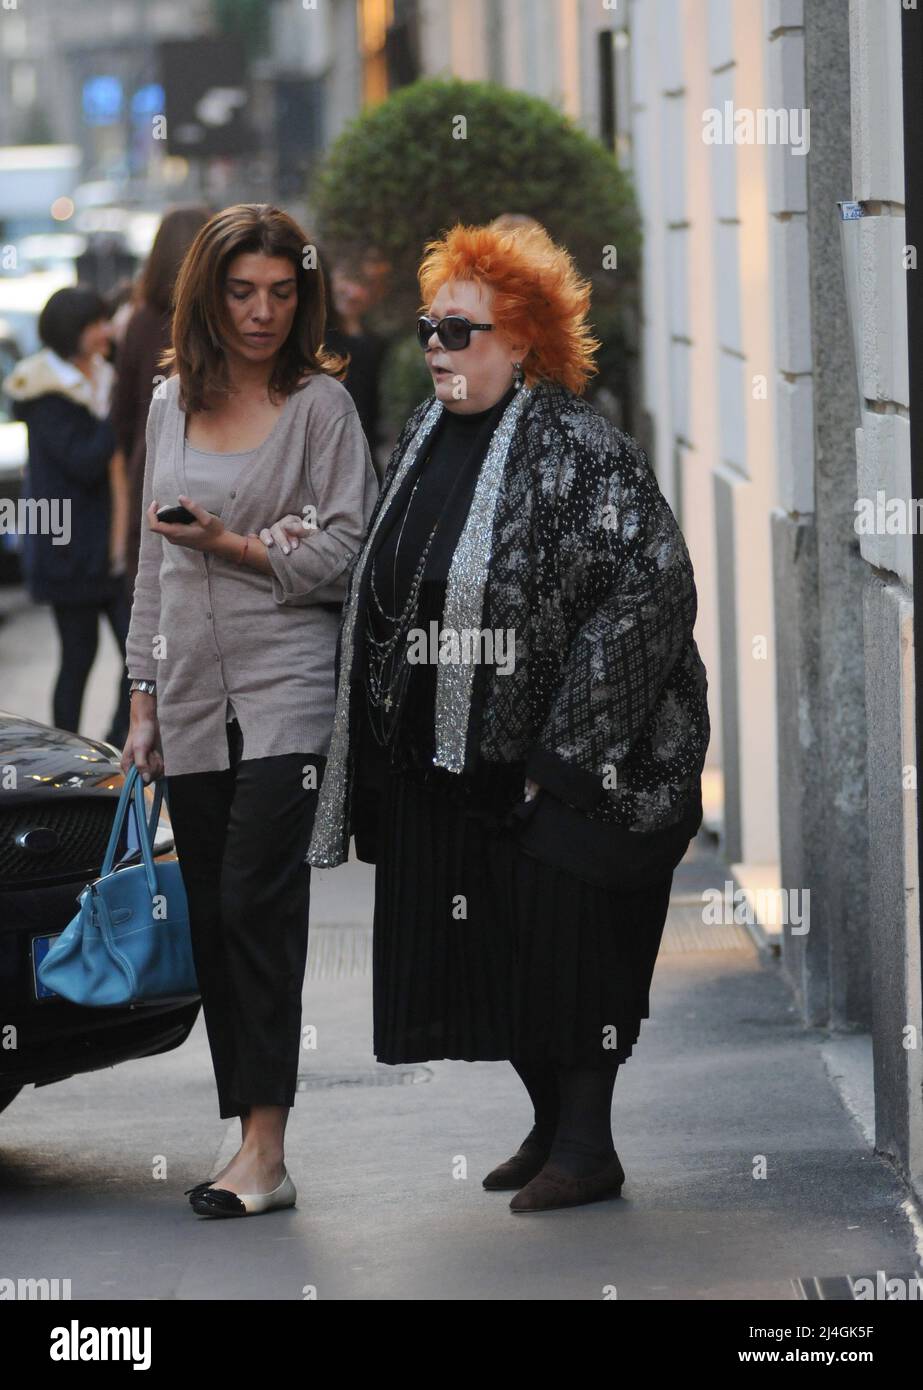 Milan, . 15th Apr, 2022. Milan, 15-04-2022 GIUSY FERRE ', Italian journalist, writer and TV personality expert in fashion and costume, passed away at the age of 75. Archive photo of 2014 in one of the rare public appearances, in the center- Credit: Independent Photo Agency/Alamy Live News Stock Photo